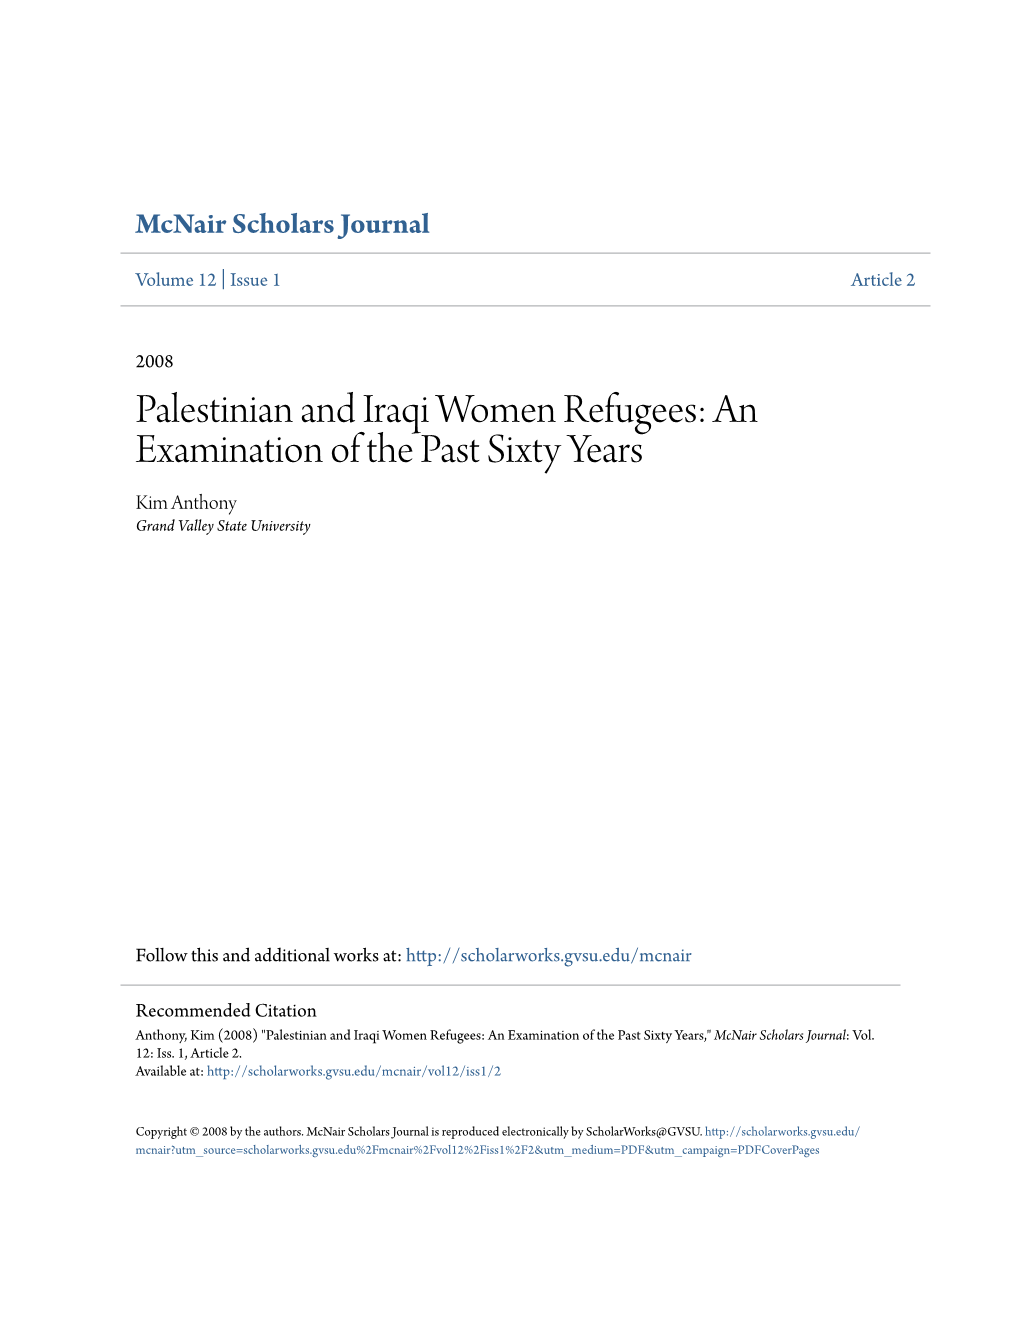 Palestinian and Iraqi Women Refugees: an Examination of the Past Sixty Years Kim Anthony Grand Valley State University